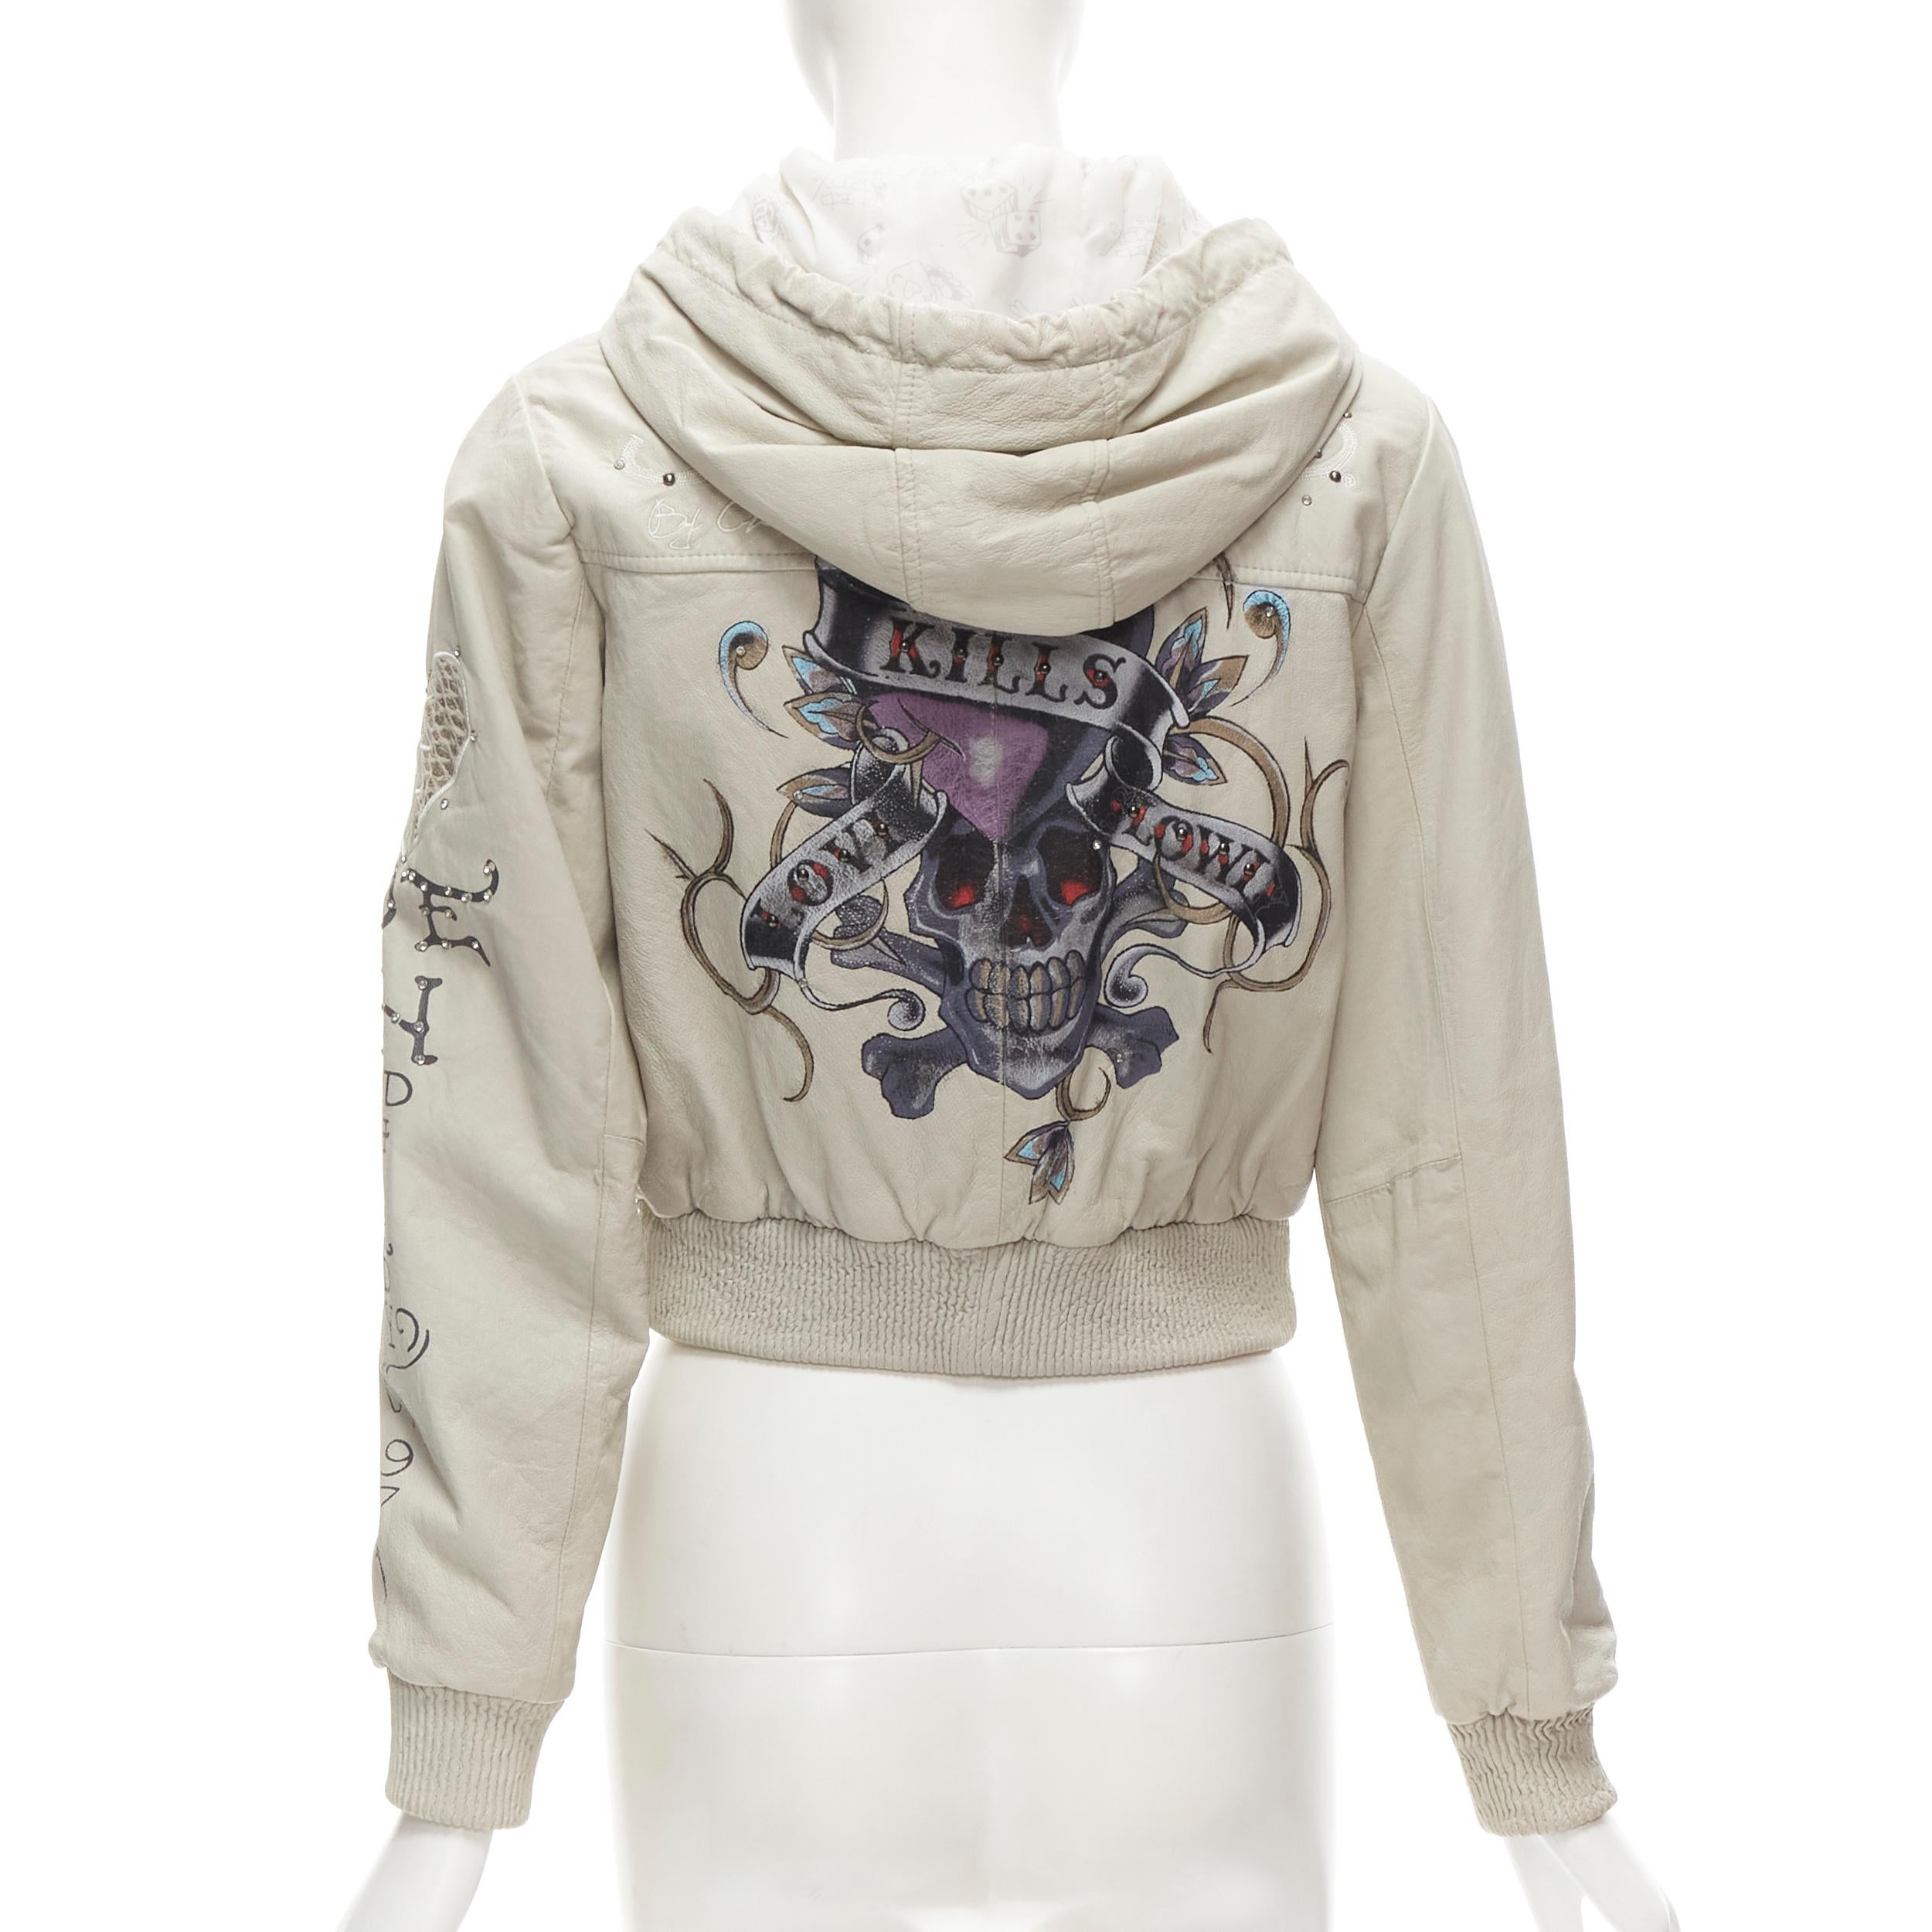 ED HARDY CHRISTIAN AUDIGIER Y2K grey leather tattoo studded cropped hoodie S
Brand: Ed Hardy
Material: Leather
Color: Grey
Pattern: Tattoo
Closure: Zip
Extra Detail: Genuine leather upper. Tattoo print with stud and crystals embellishment.